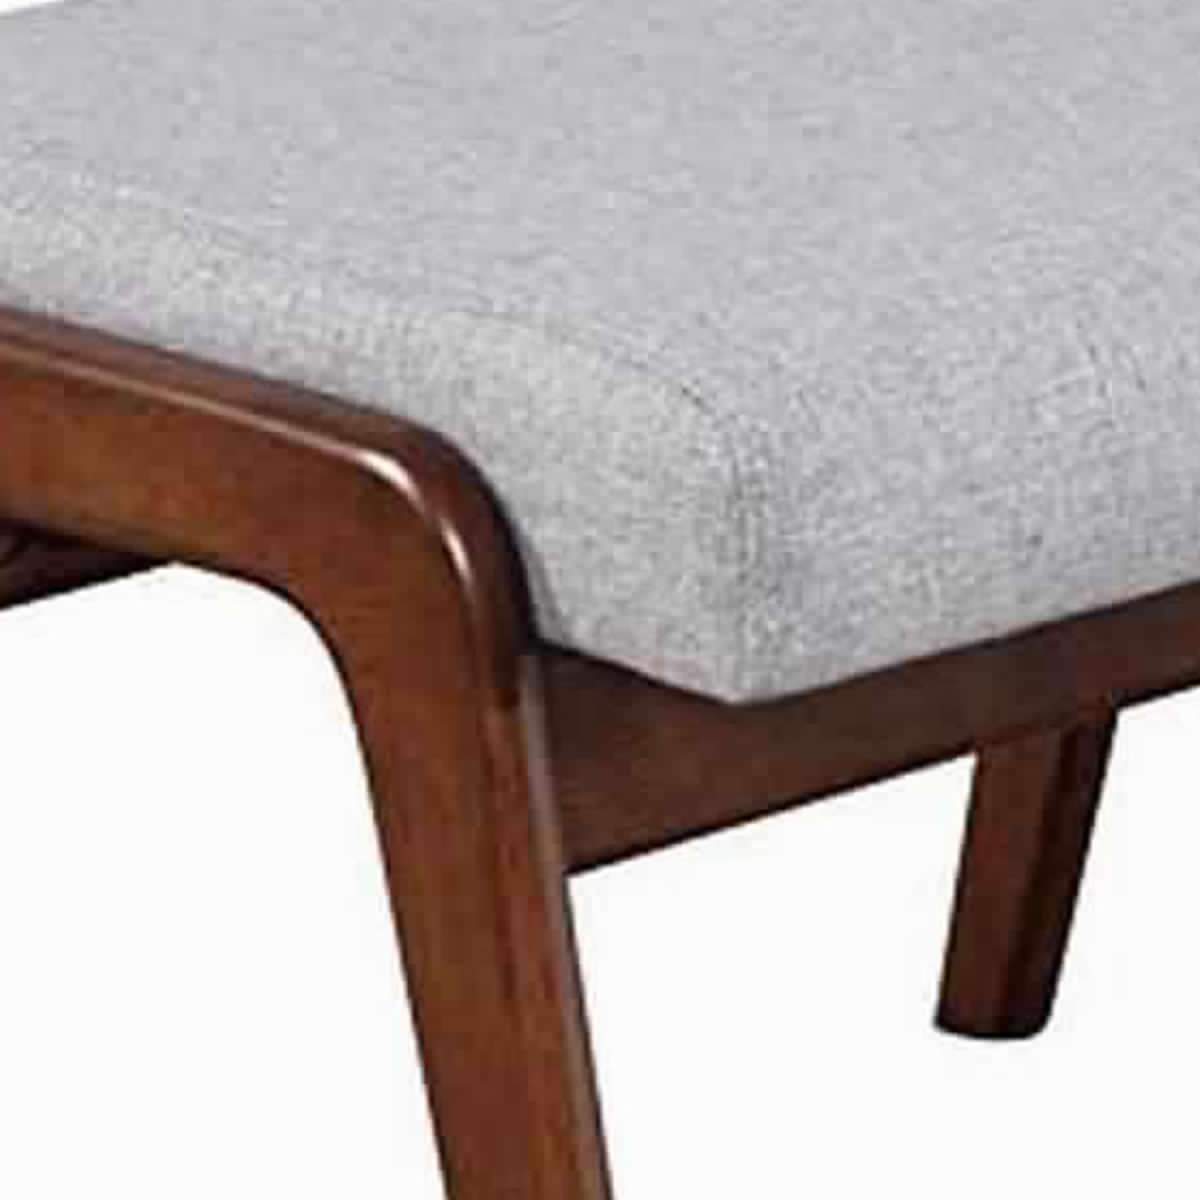 Wooden Footrest with Fabric Upholstered Padded Top, Gray and brown - BM220534